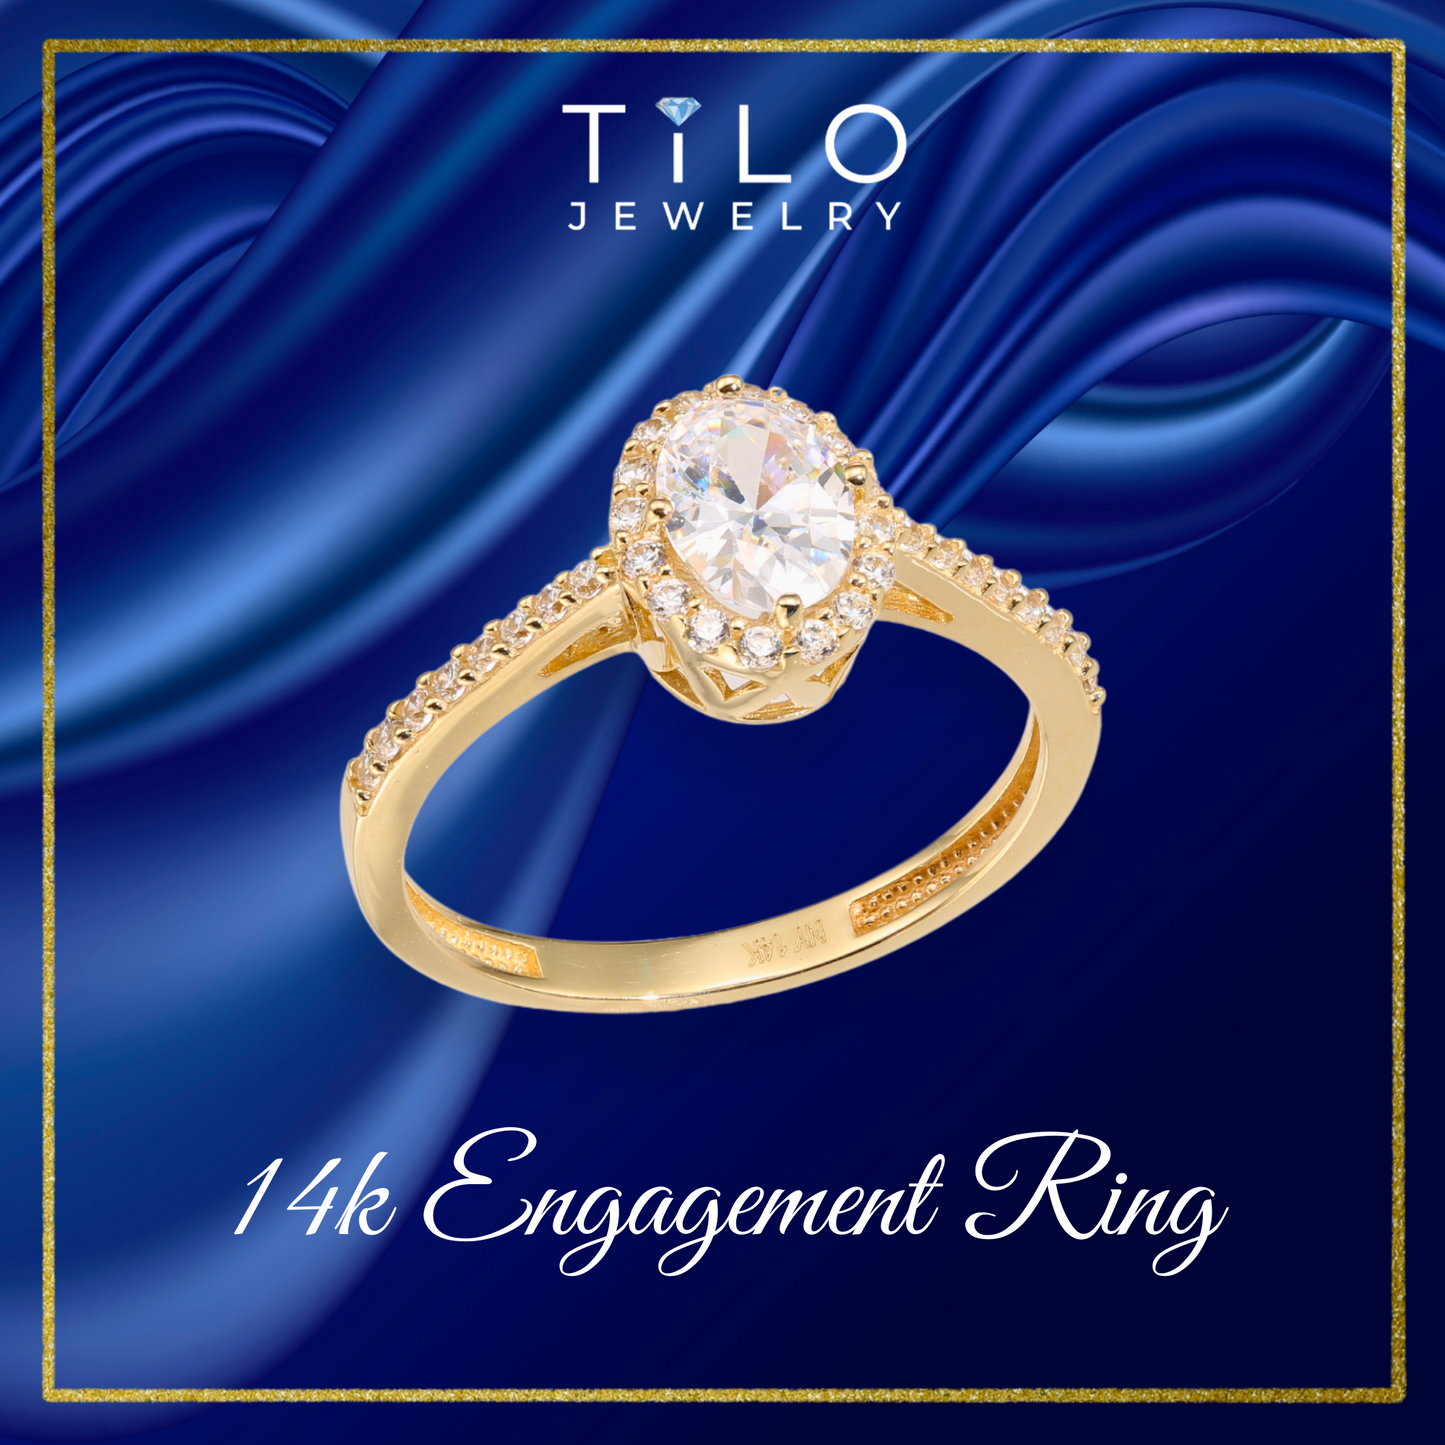 14K Yellow Gold Oval Halo Engagement Ring With Side Stones, By TILO Jewelry